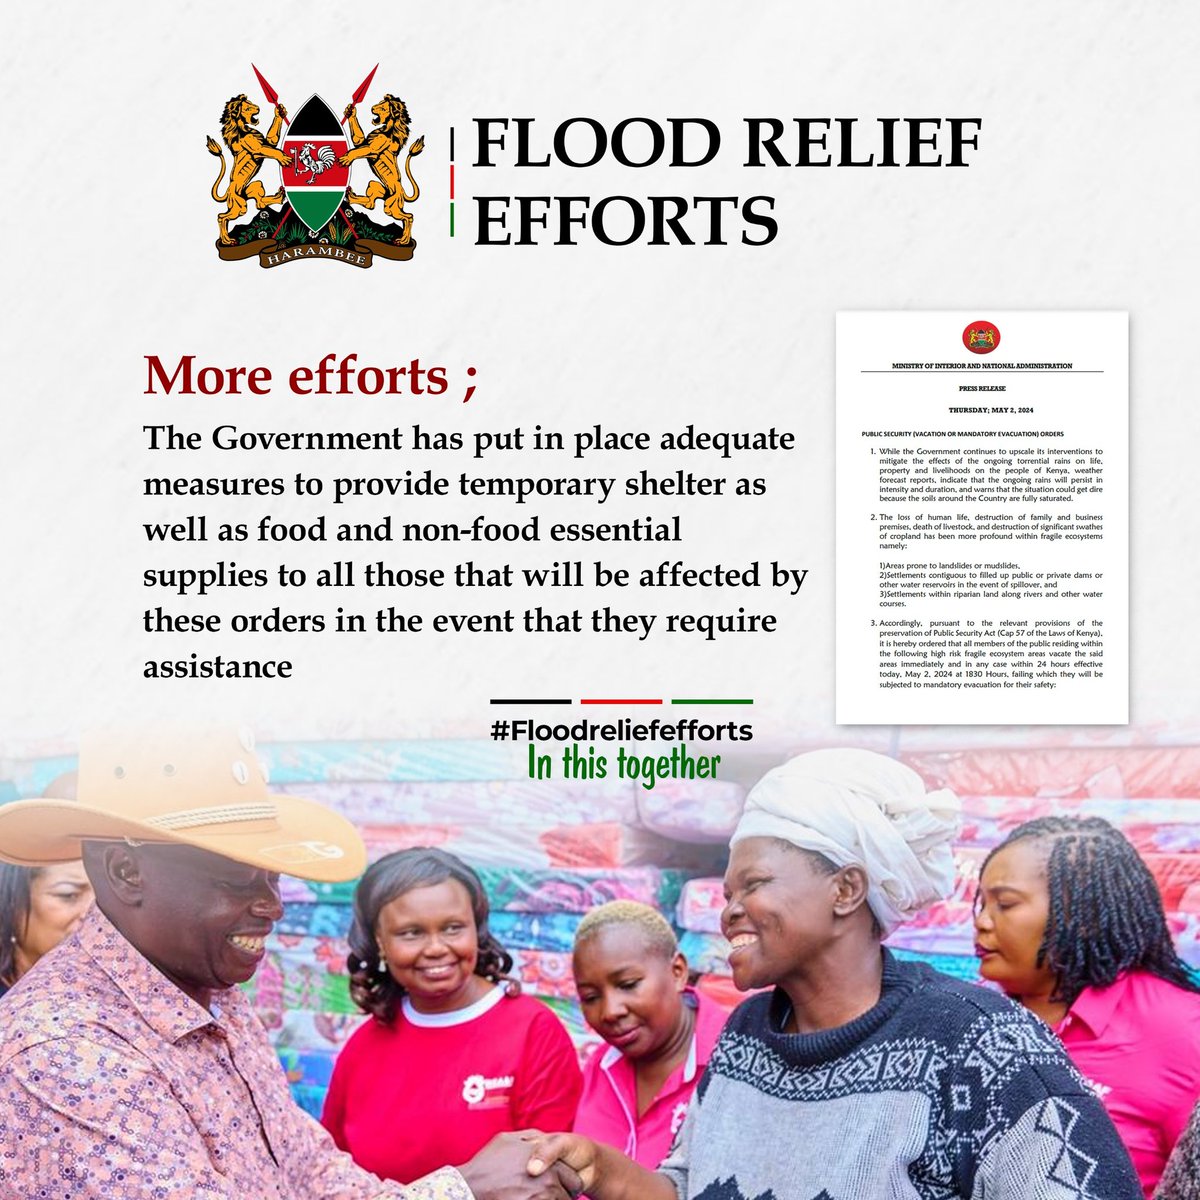 Some schools have been flooded, while others are being occupied by people who have been displaced by mudslides, landslides and floods.
#FloodReliefEfforts
In It Together